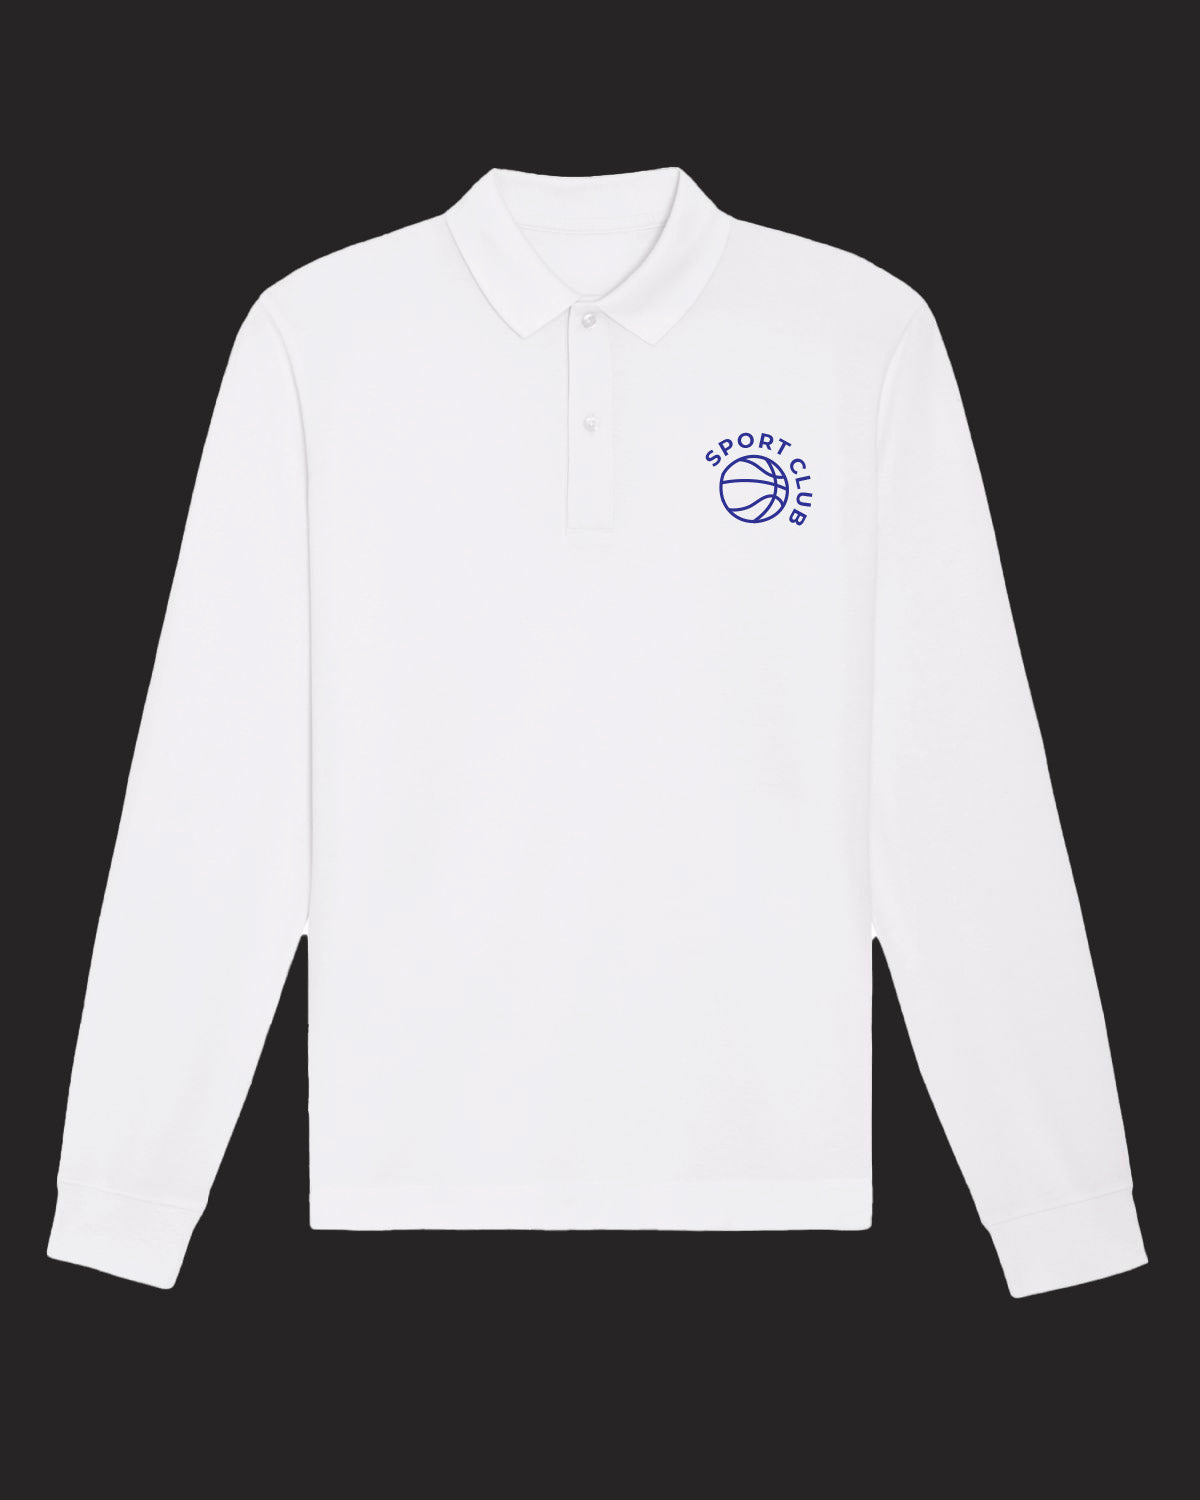 Customize your own Polo Long Sleeve